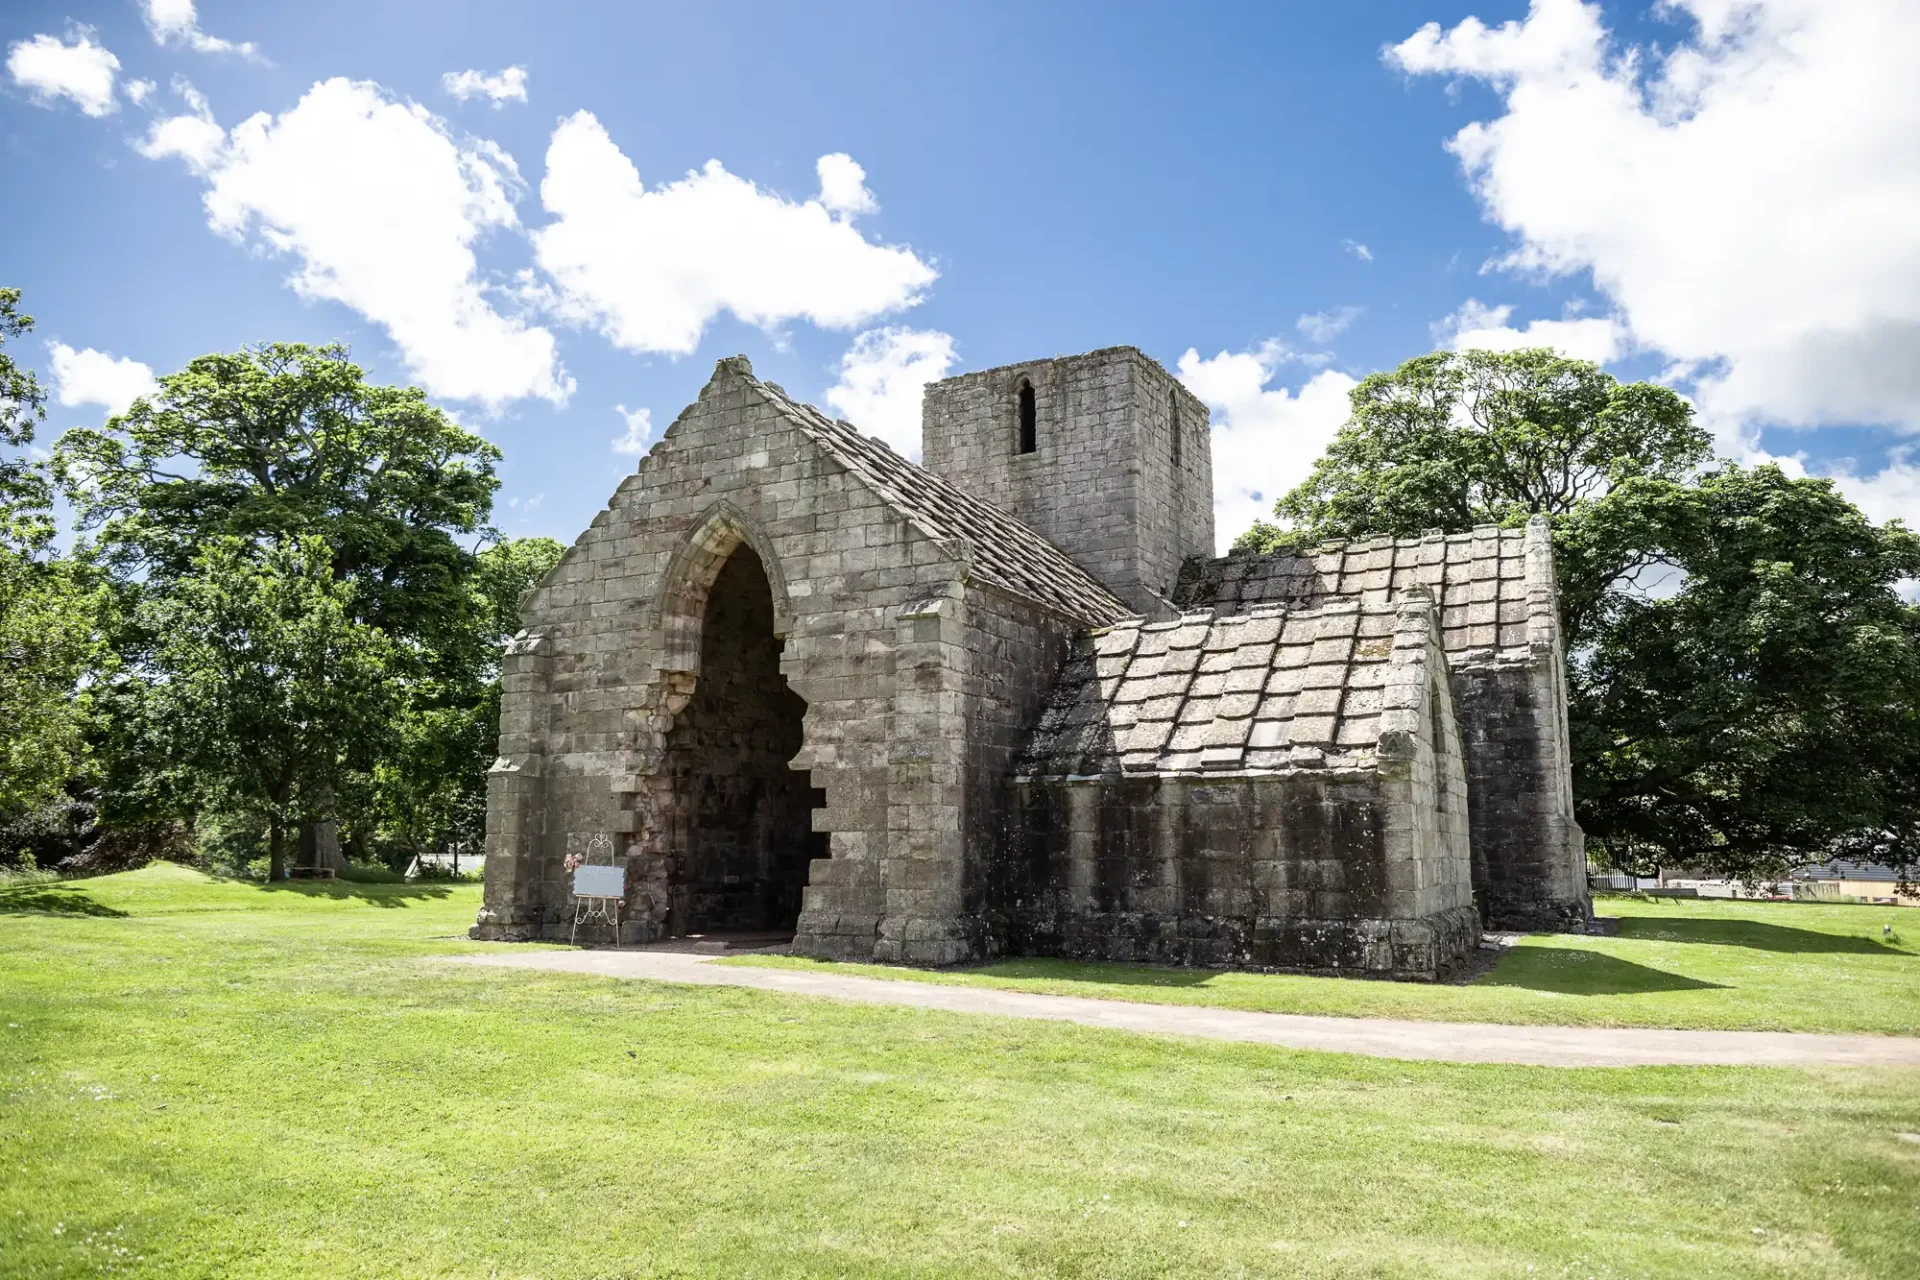 Stone ruins of a medieval abbey with an arched entrance, surrounded by lush green grass and trees under a clear blue sky.